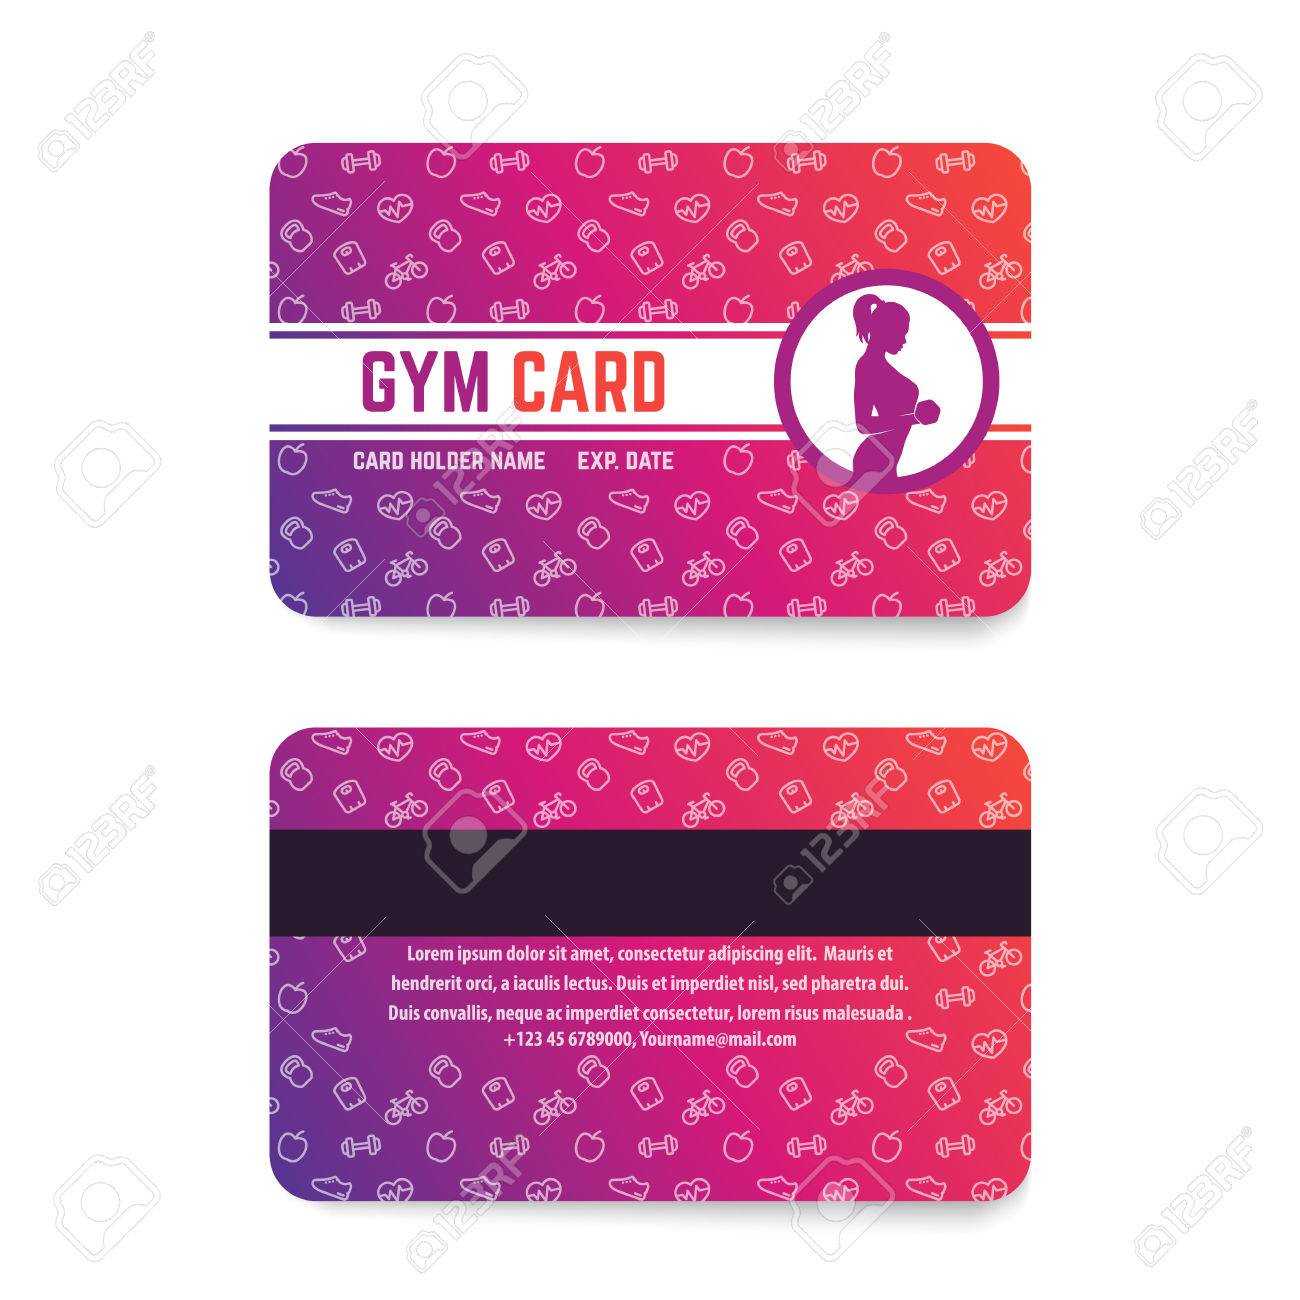 A Fitness Club Or Gym Card Template. For Gym Membership Card Template